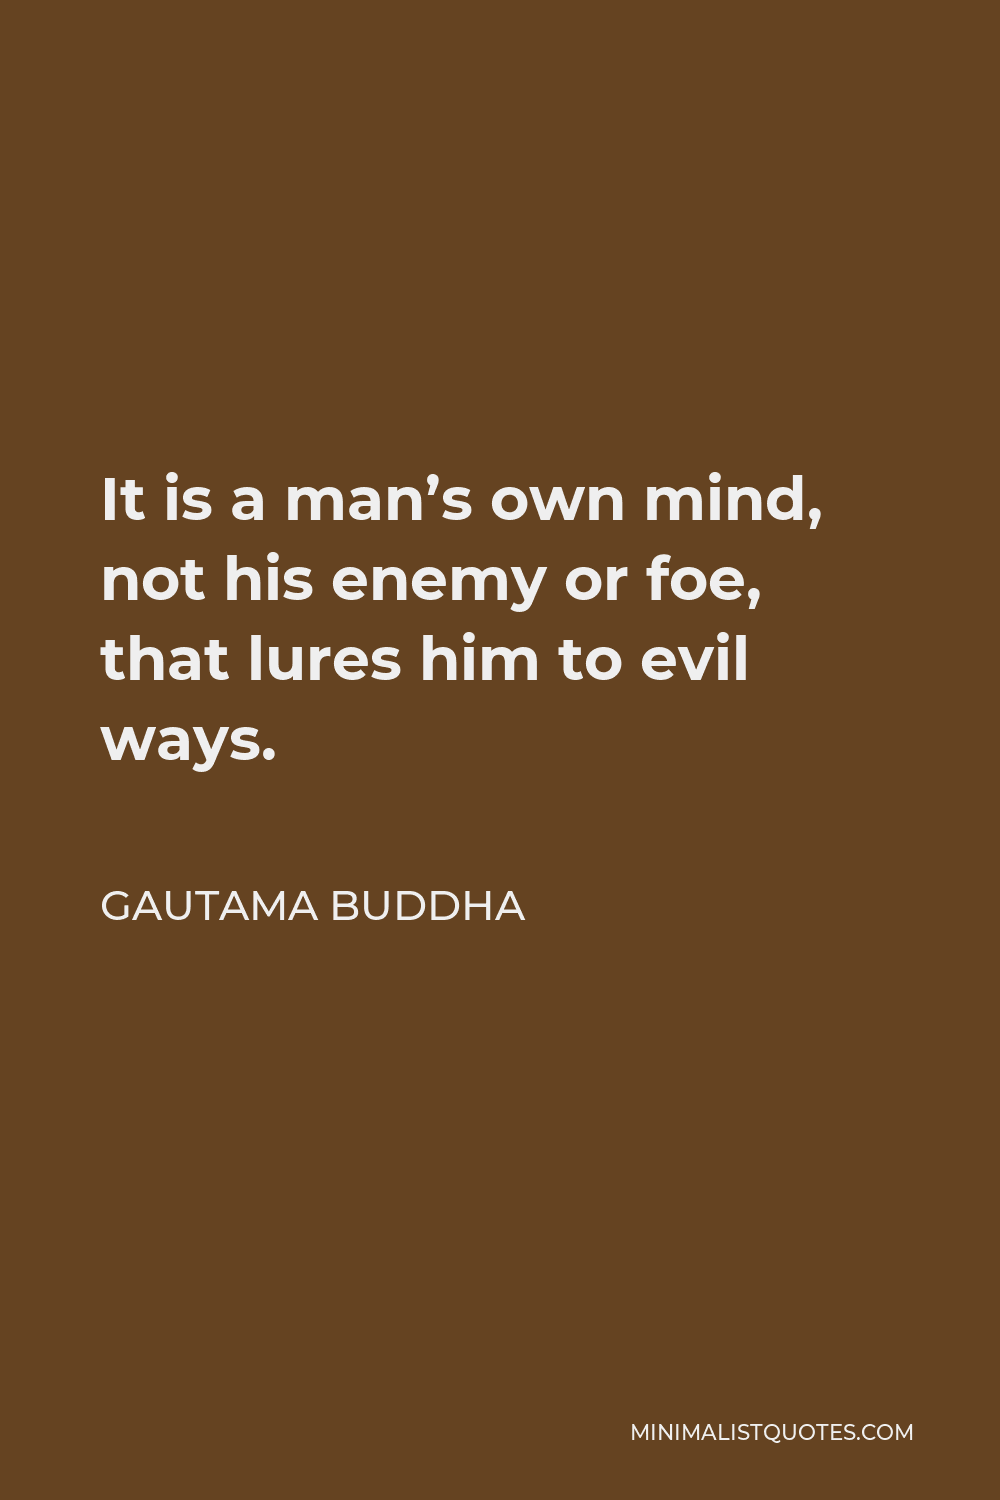 Gautama Buddha Quote - It is a man’s own mind, not his enemy or foe, that lures him to evil ways.